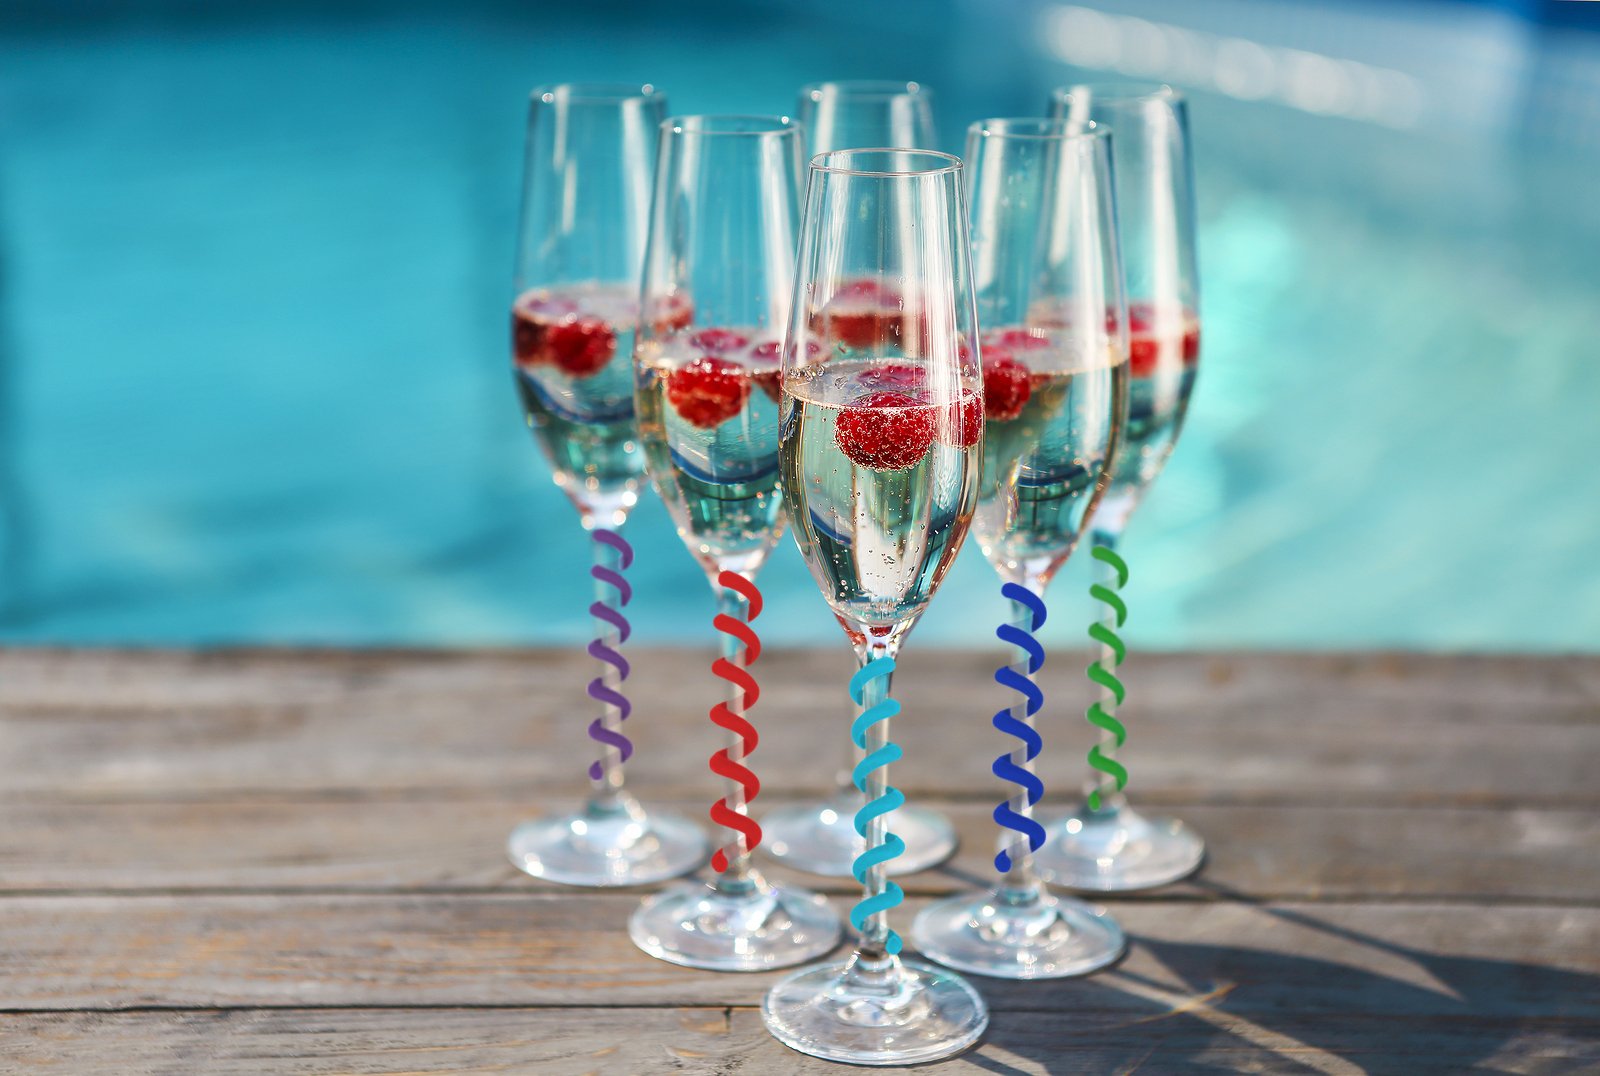 Simply Charmed Wine Glass Charms Set of 8 Silicone Drink Markers for Cocktails, Martinis, Champagne Flutes and More